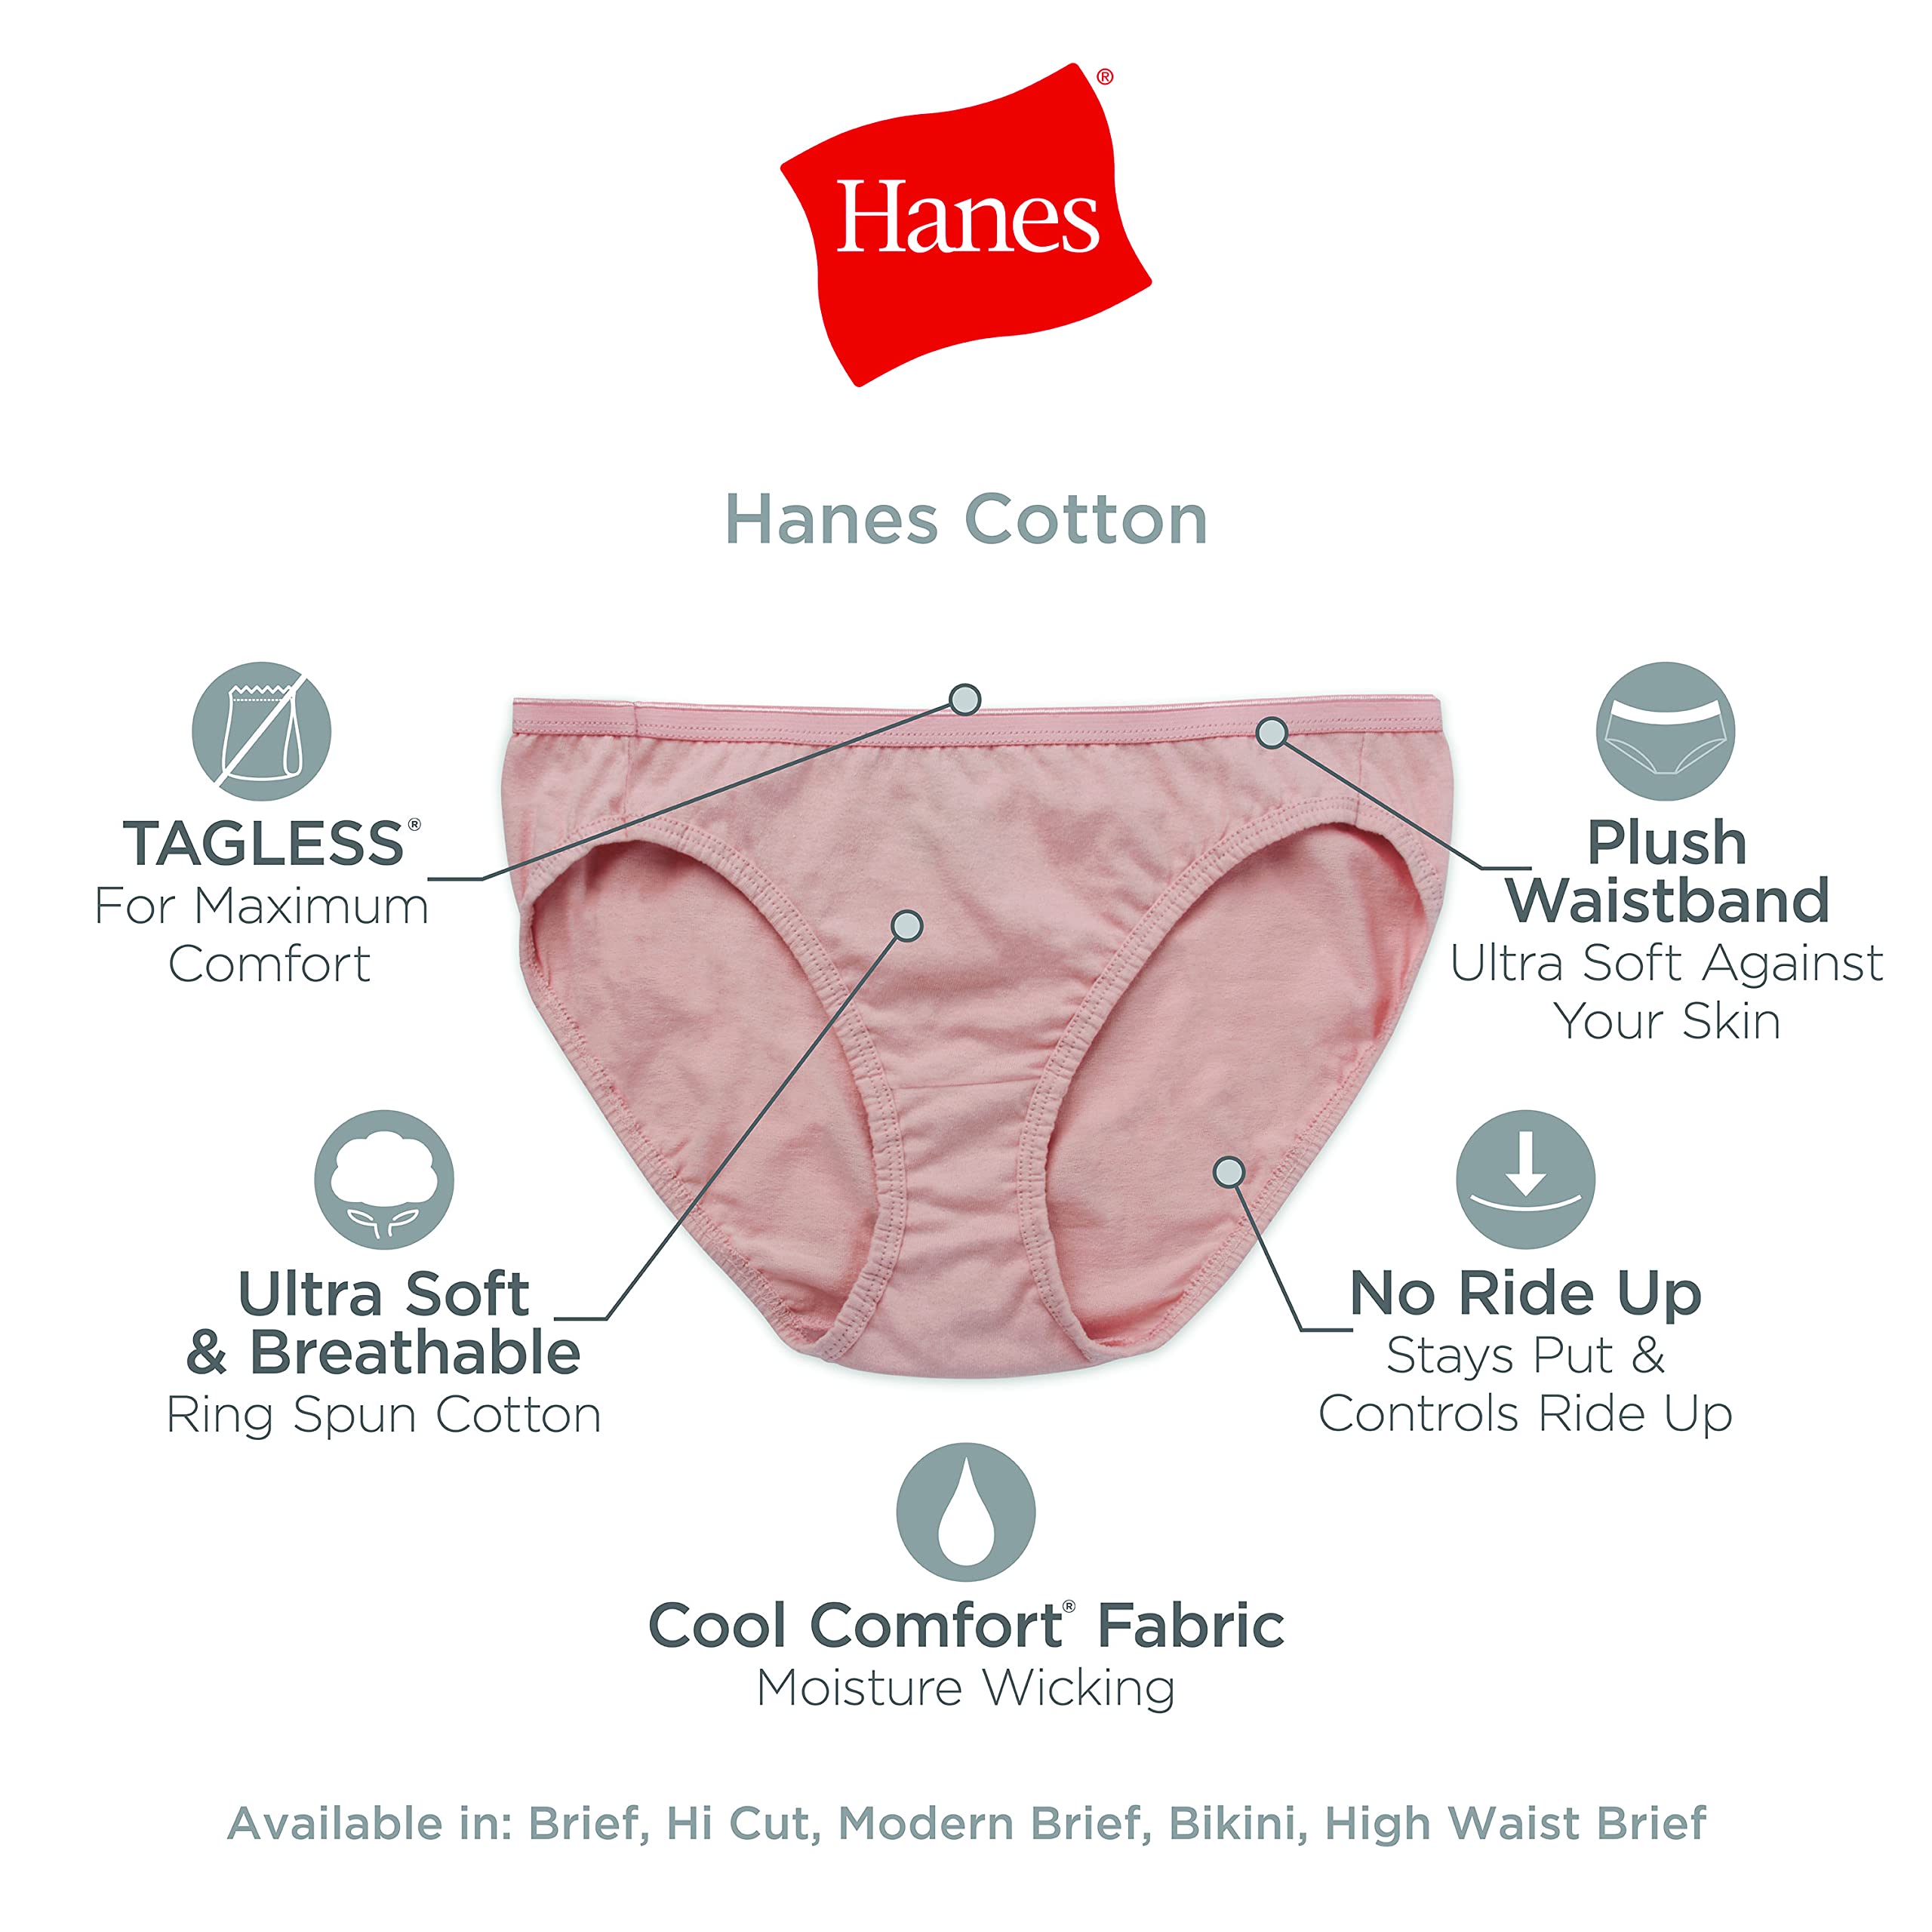 Hanes Women's Signature Cotton Breathe Briefs Underwear Pack, 6-Pack (Colors May Vary)